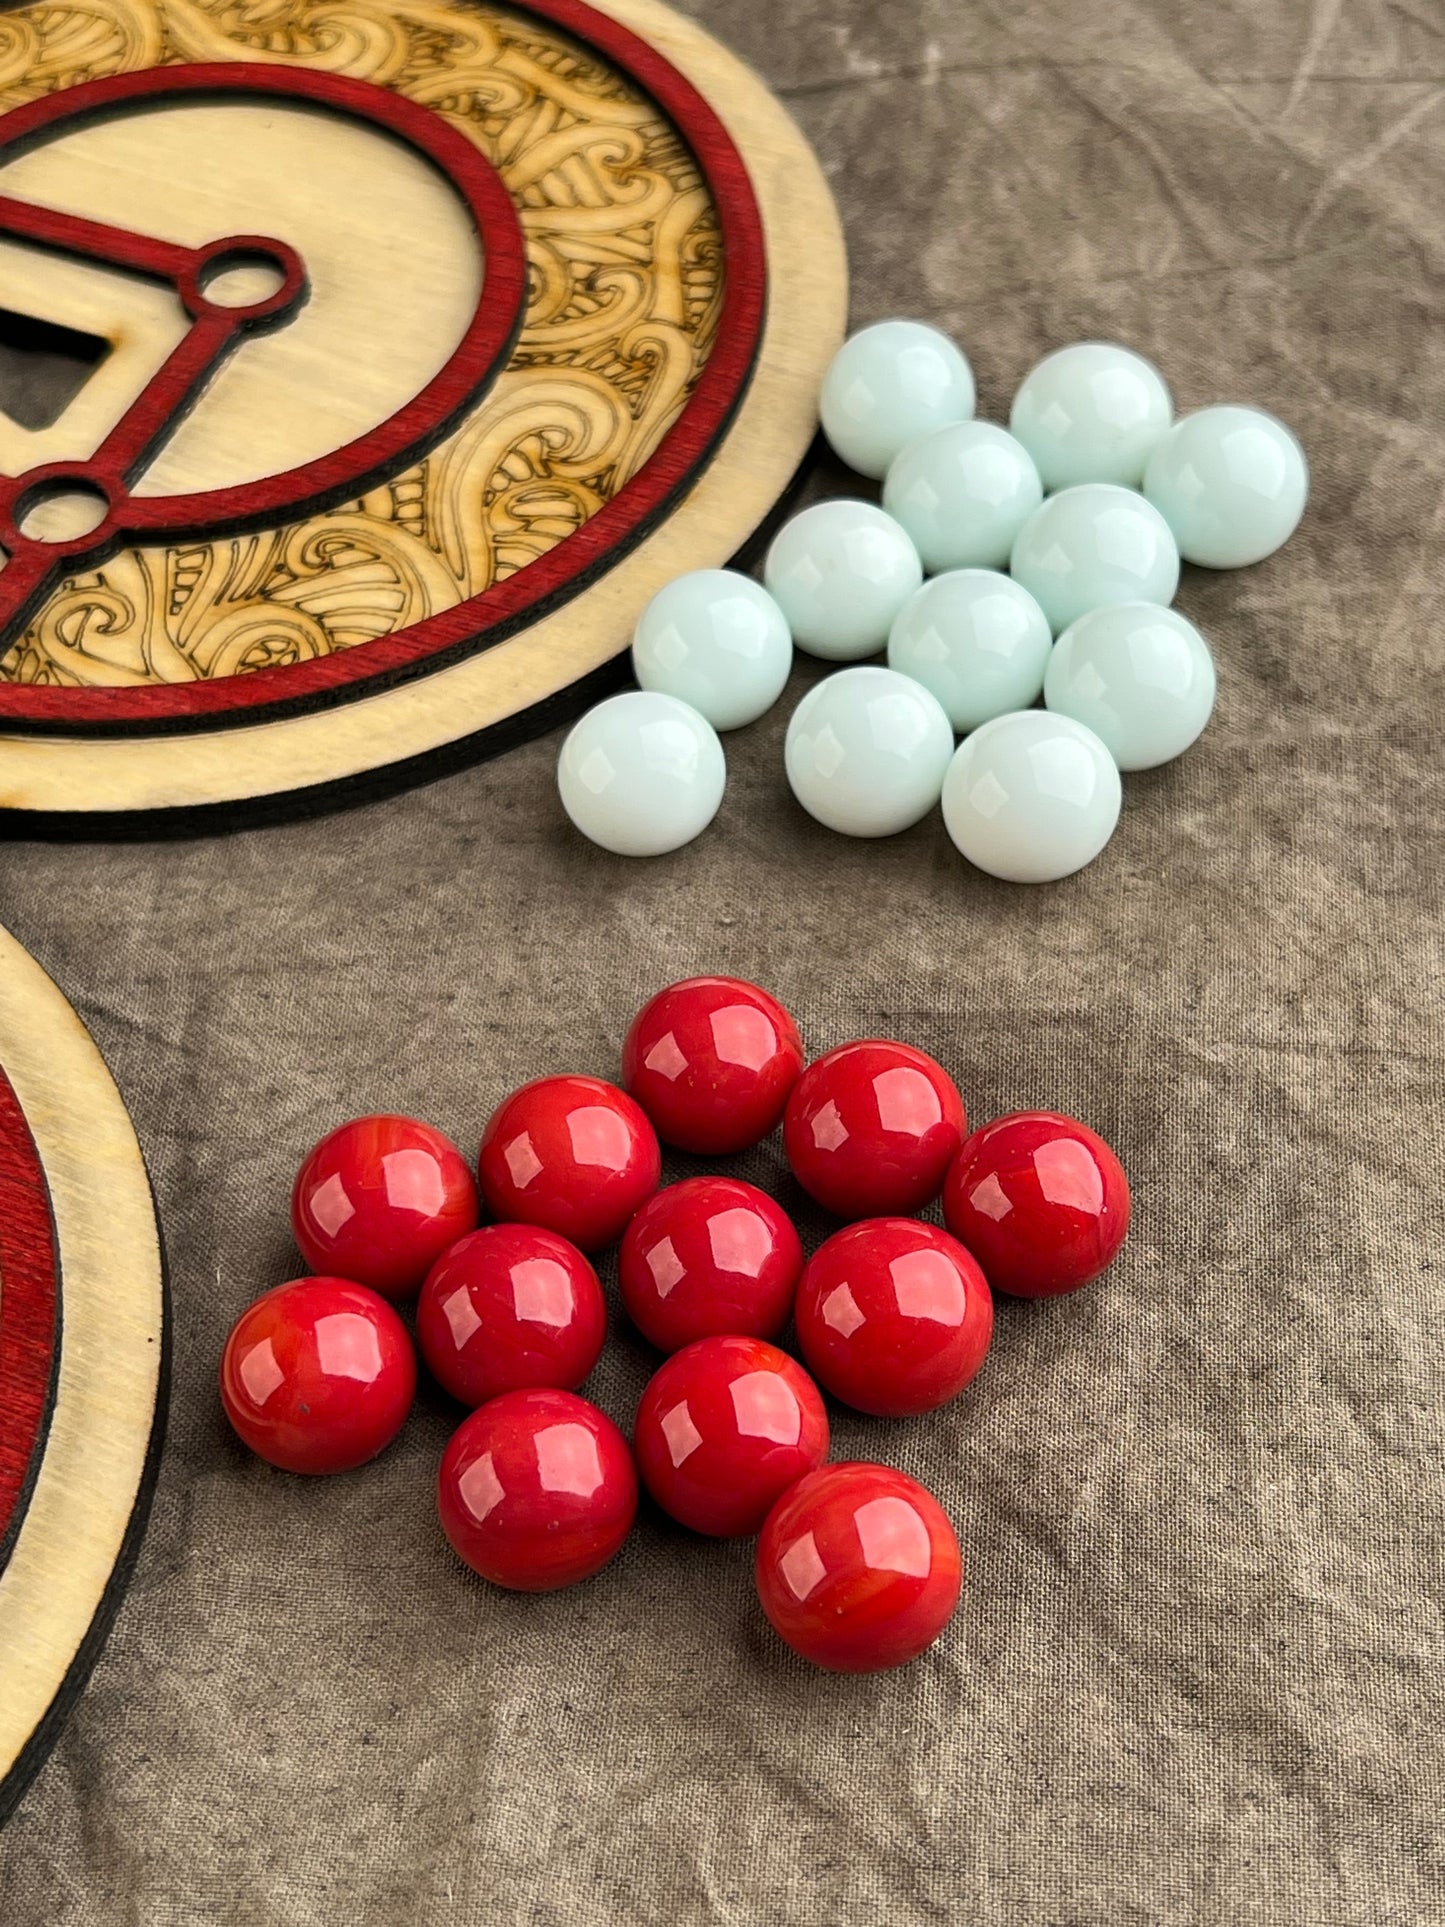 Surakarta! A Mysterious Abstract Game from the exotic land of Indonesia. Wood & Hand Made Glass Marbles!